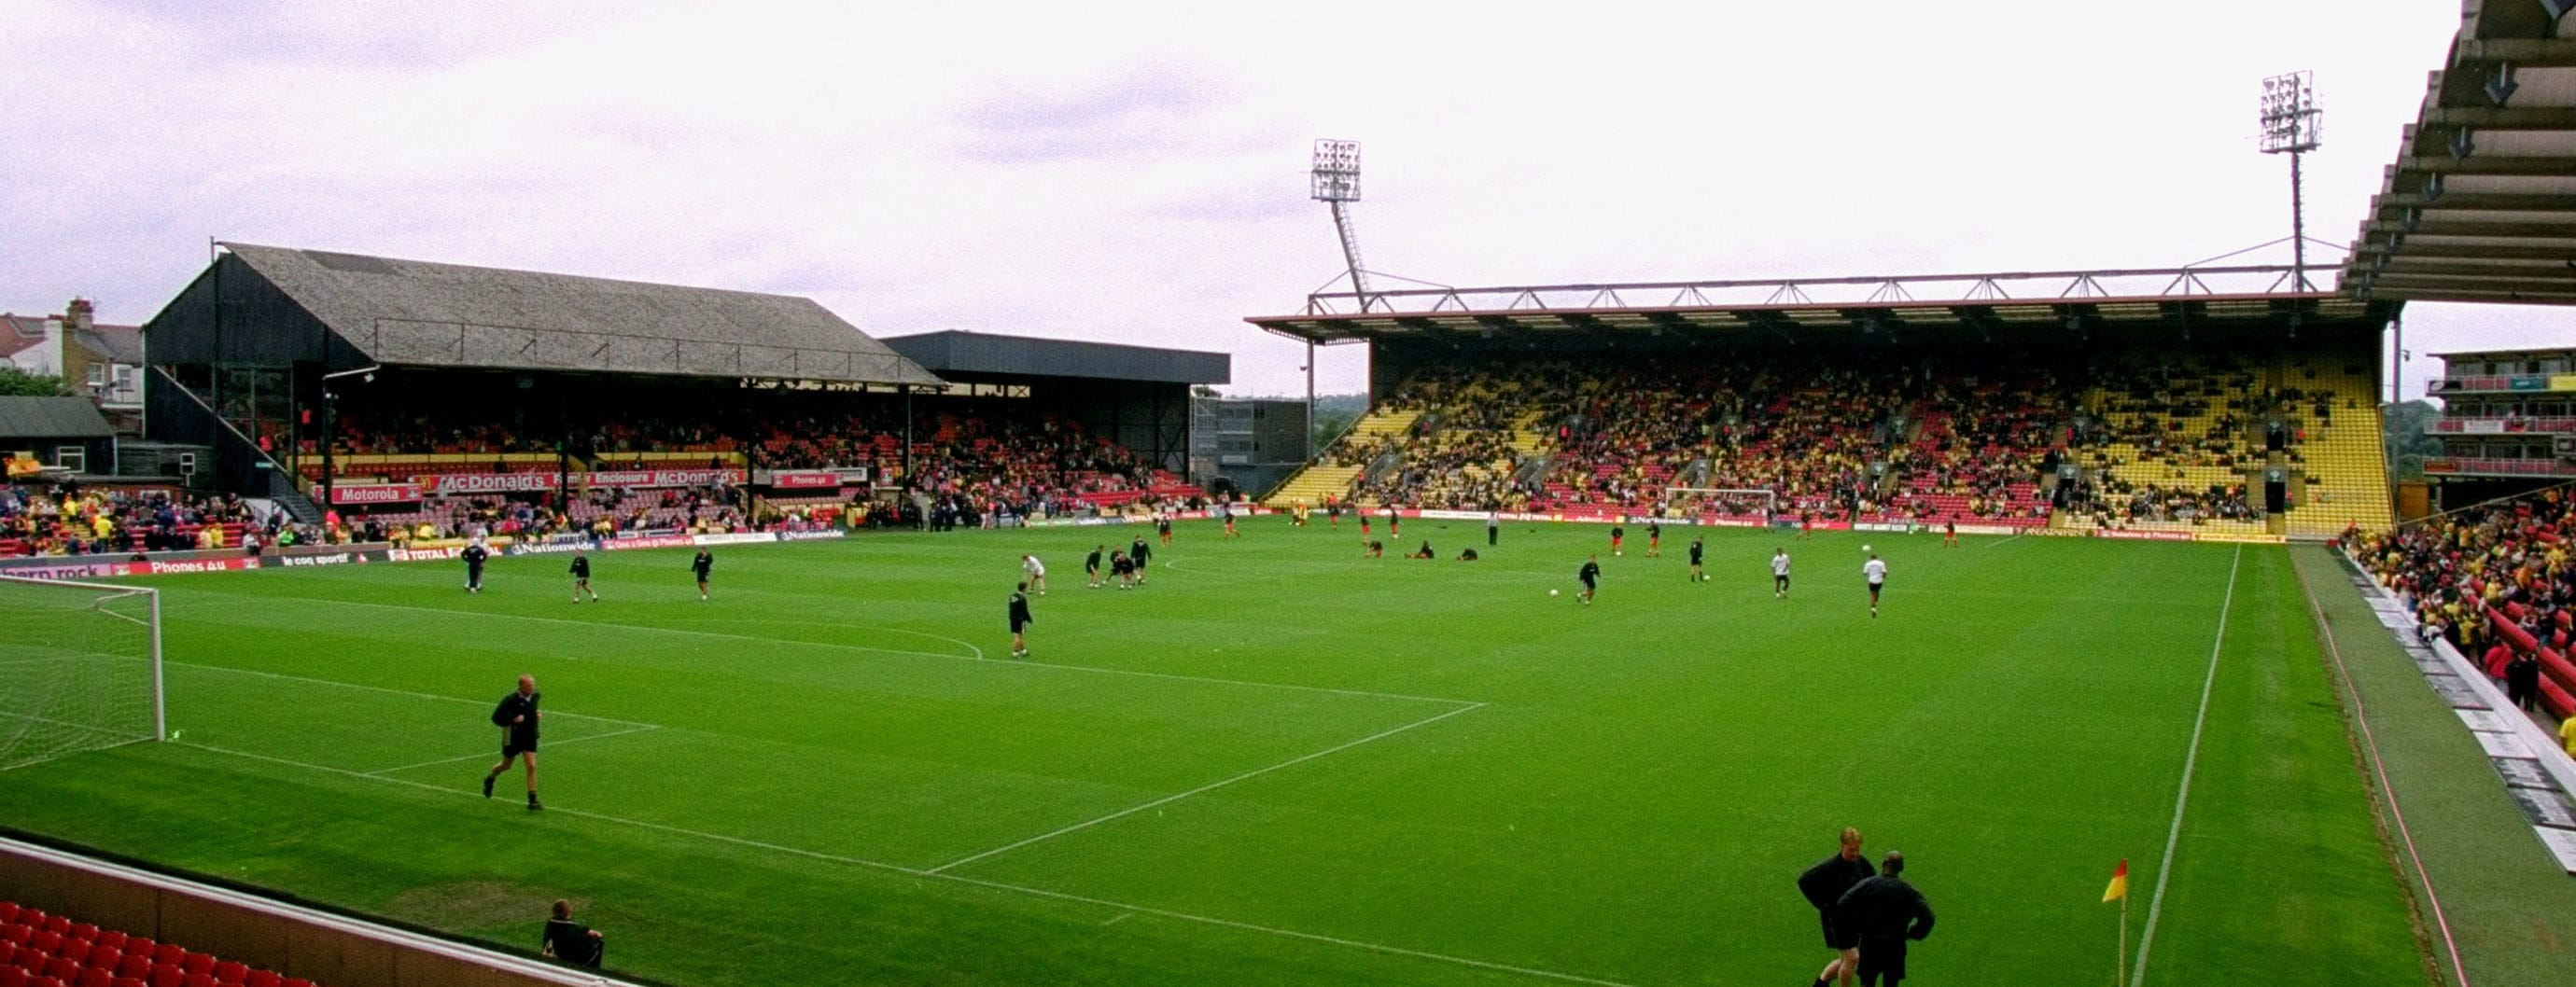 Vicarage Road is one of the most exciting English football stadiums